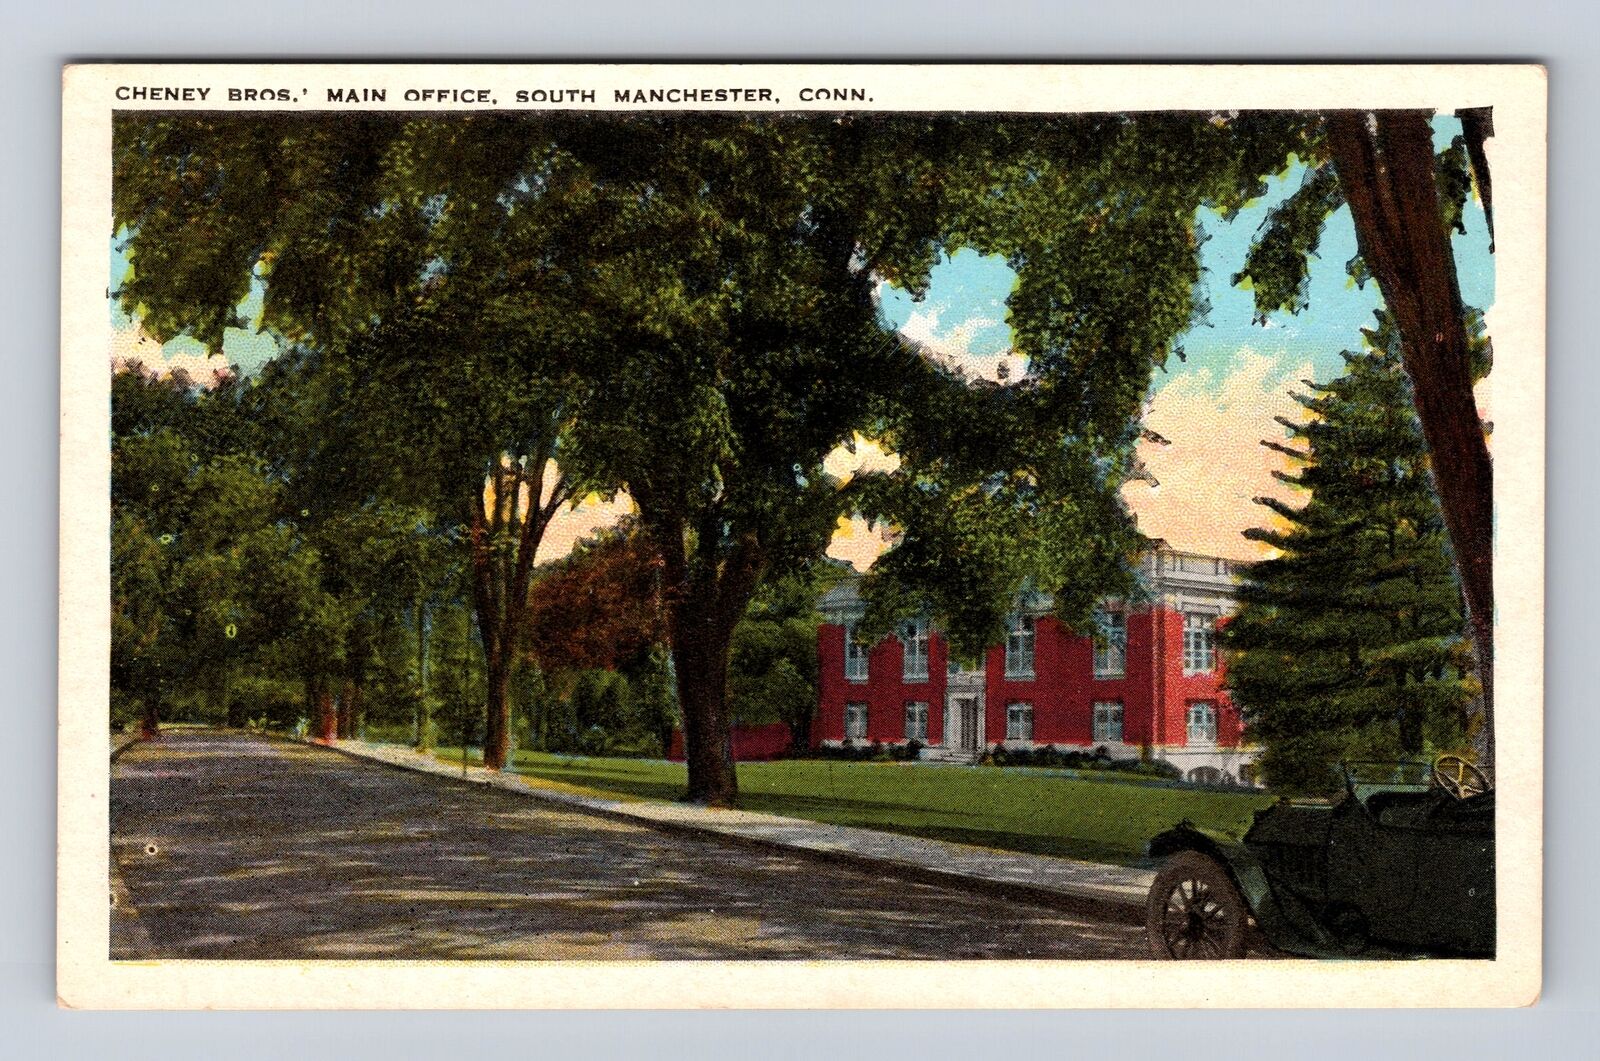 South Manchester CT-Connecticut, Cheney Bros Main Office, Vintage Postcard